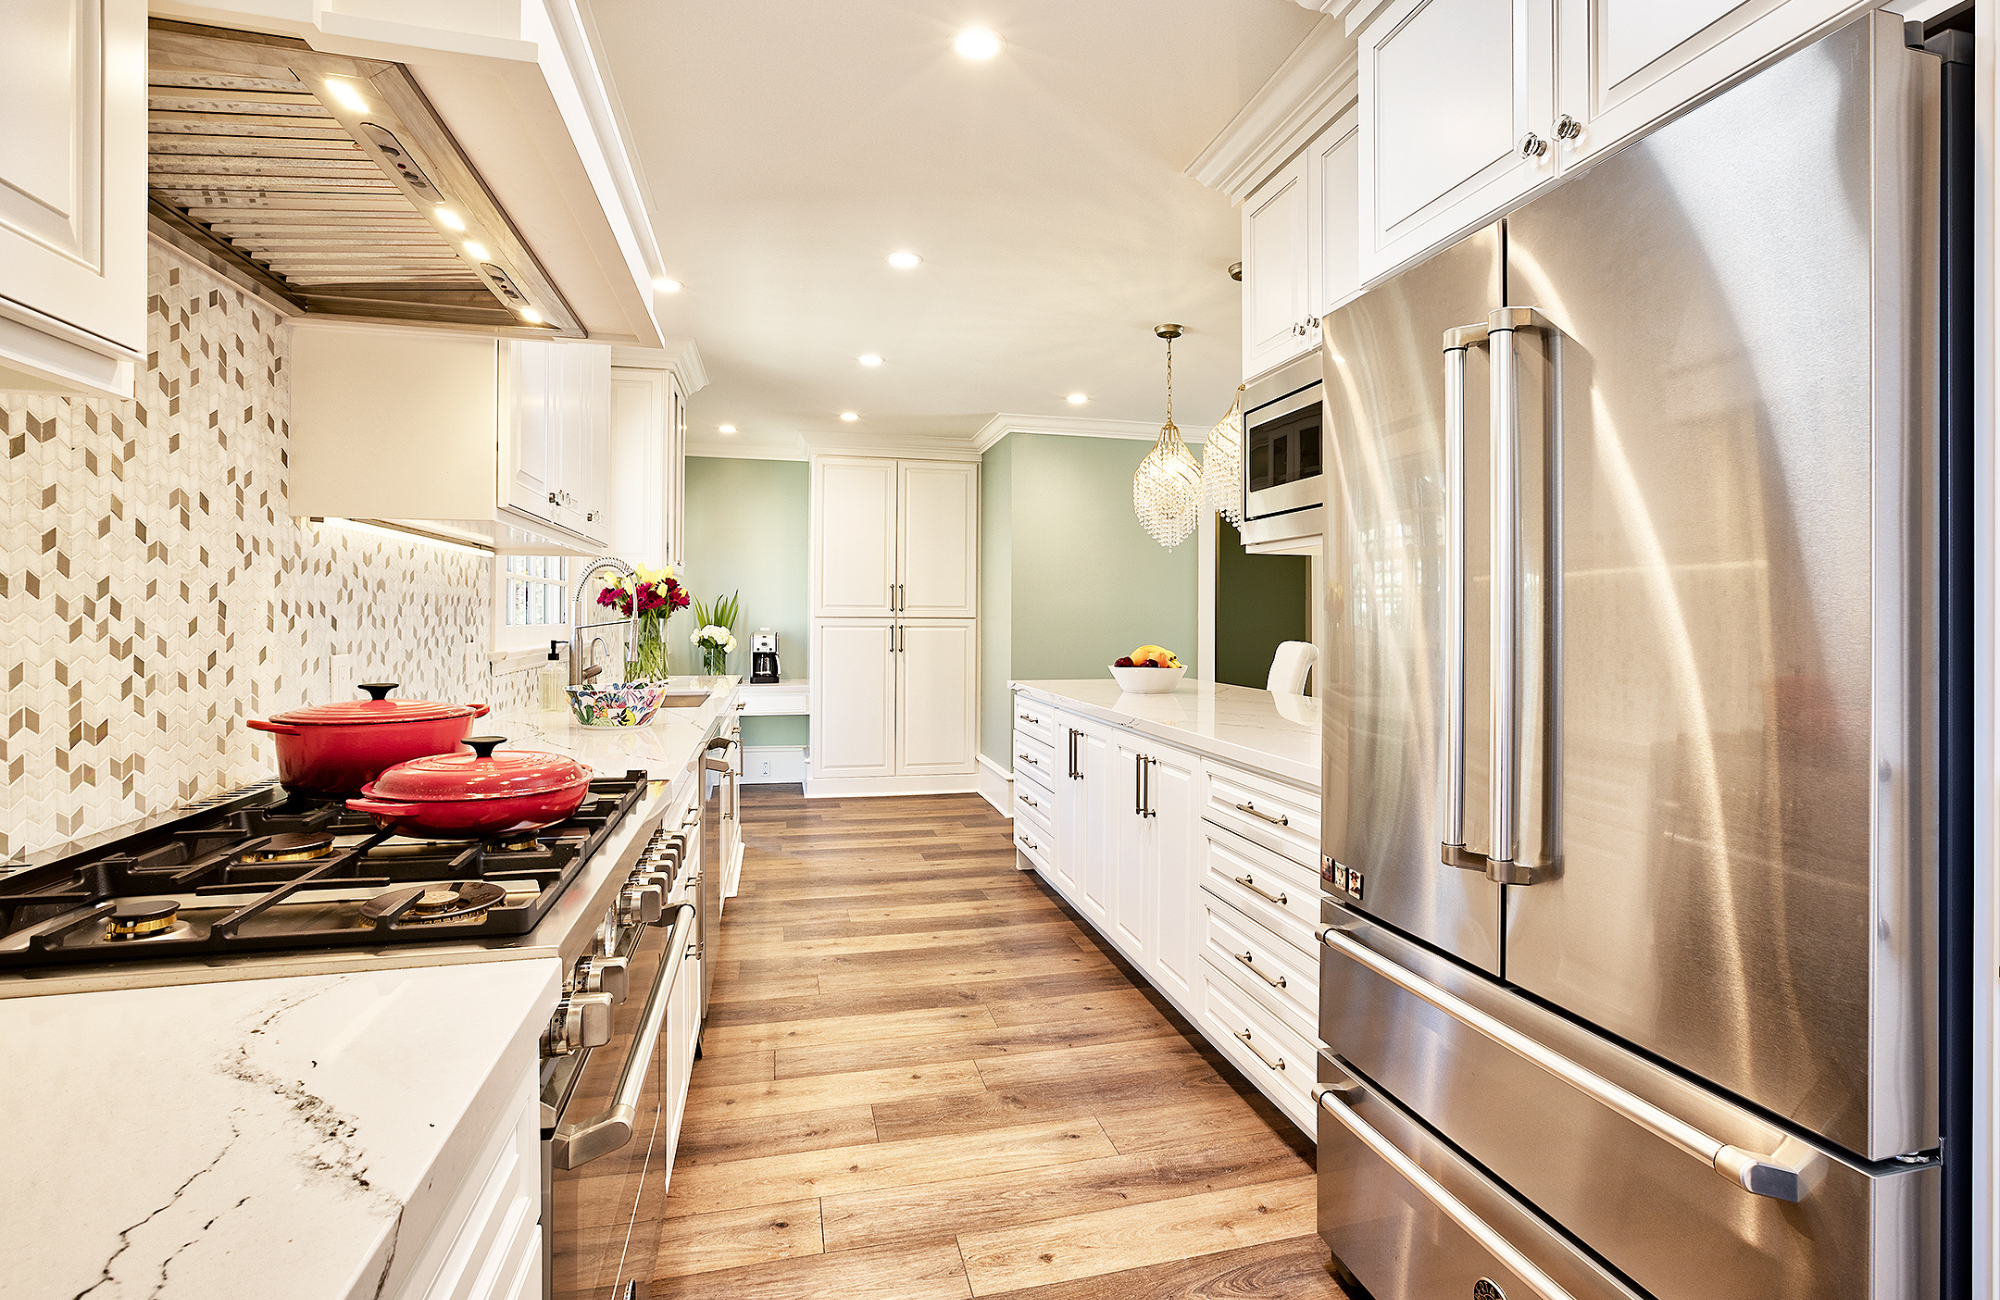 raashi-design-danville-ca-durable-home-finishes-kid-pet-friendly-durable-flooring-transitional-contemporary-kitchen-design